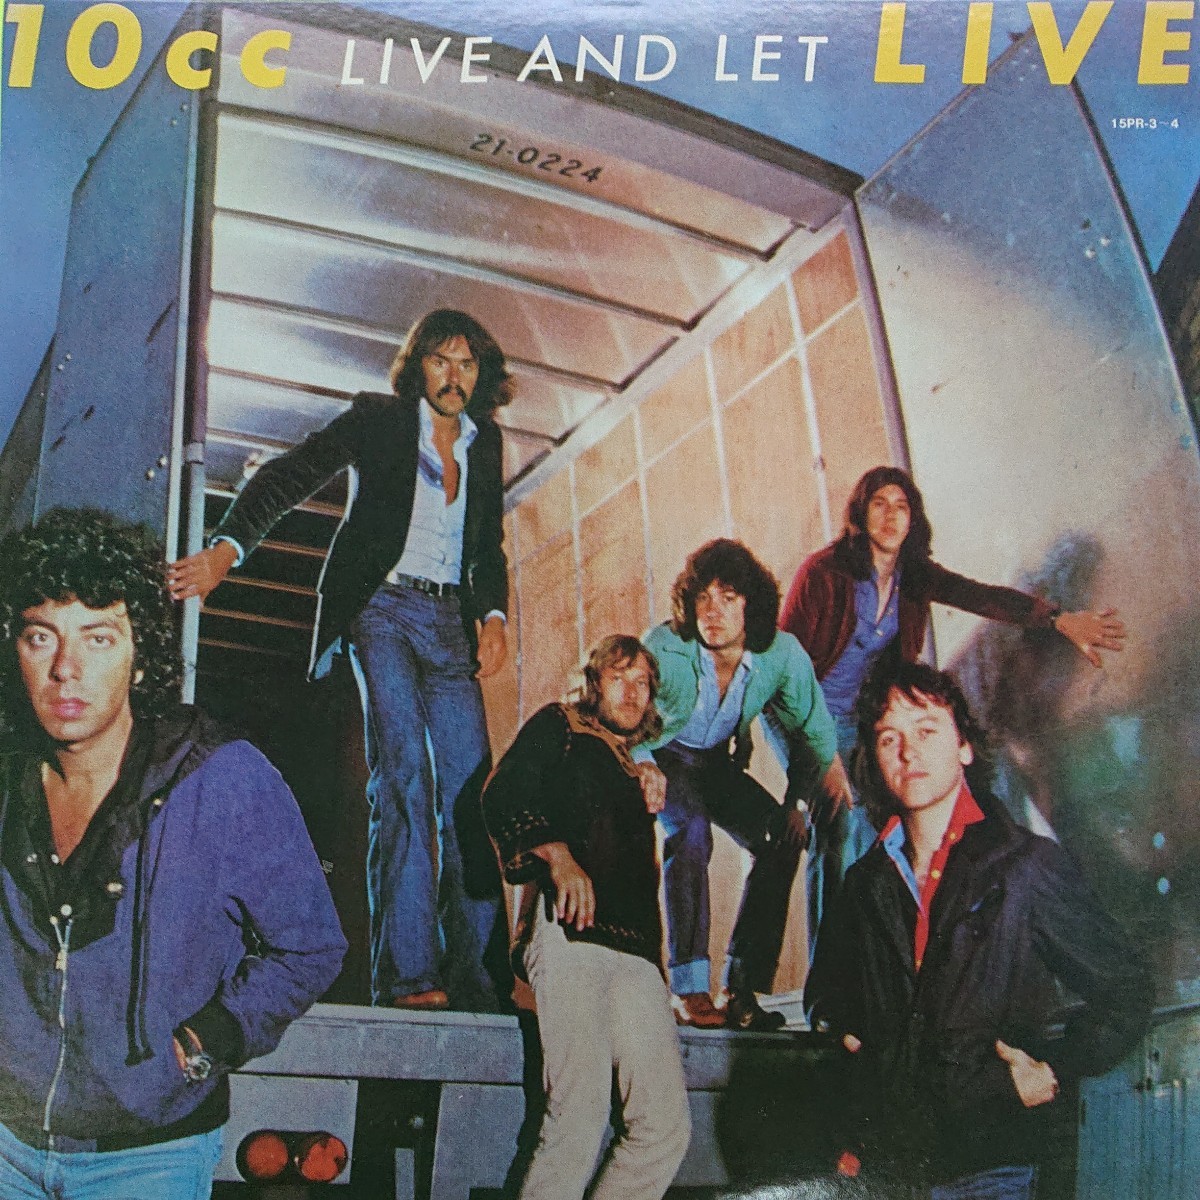 LP/10cc〈LIVE AND LET LIVE〉☆5点以上まとめて（送料0円）無料☆_画像1